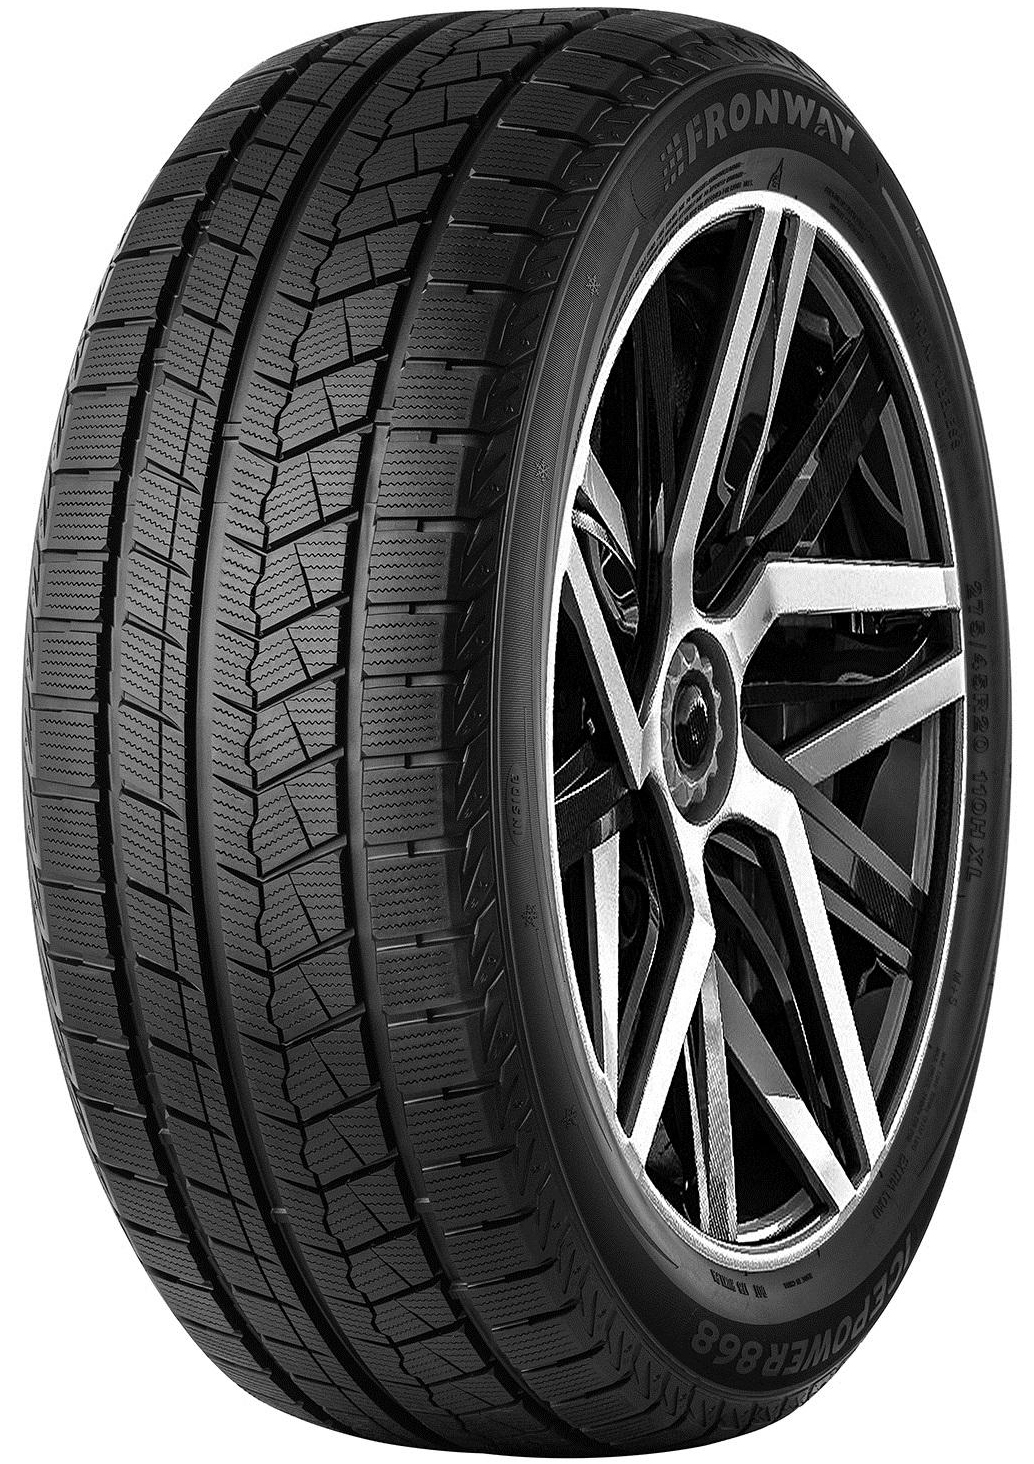    Fronway Icepower 868 215/50 R17 